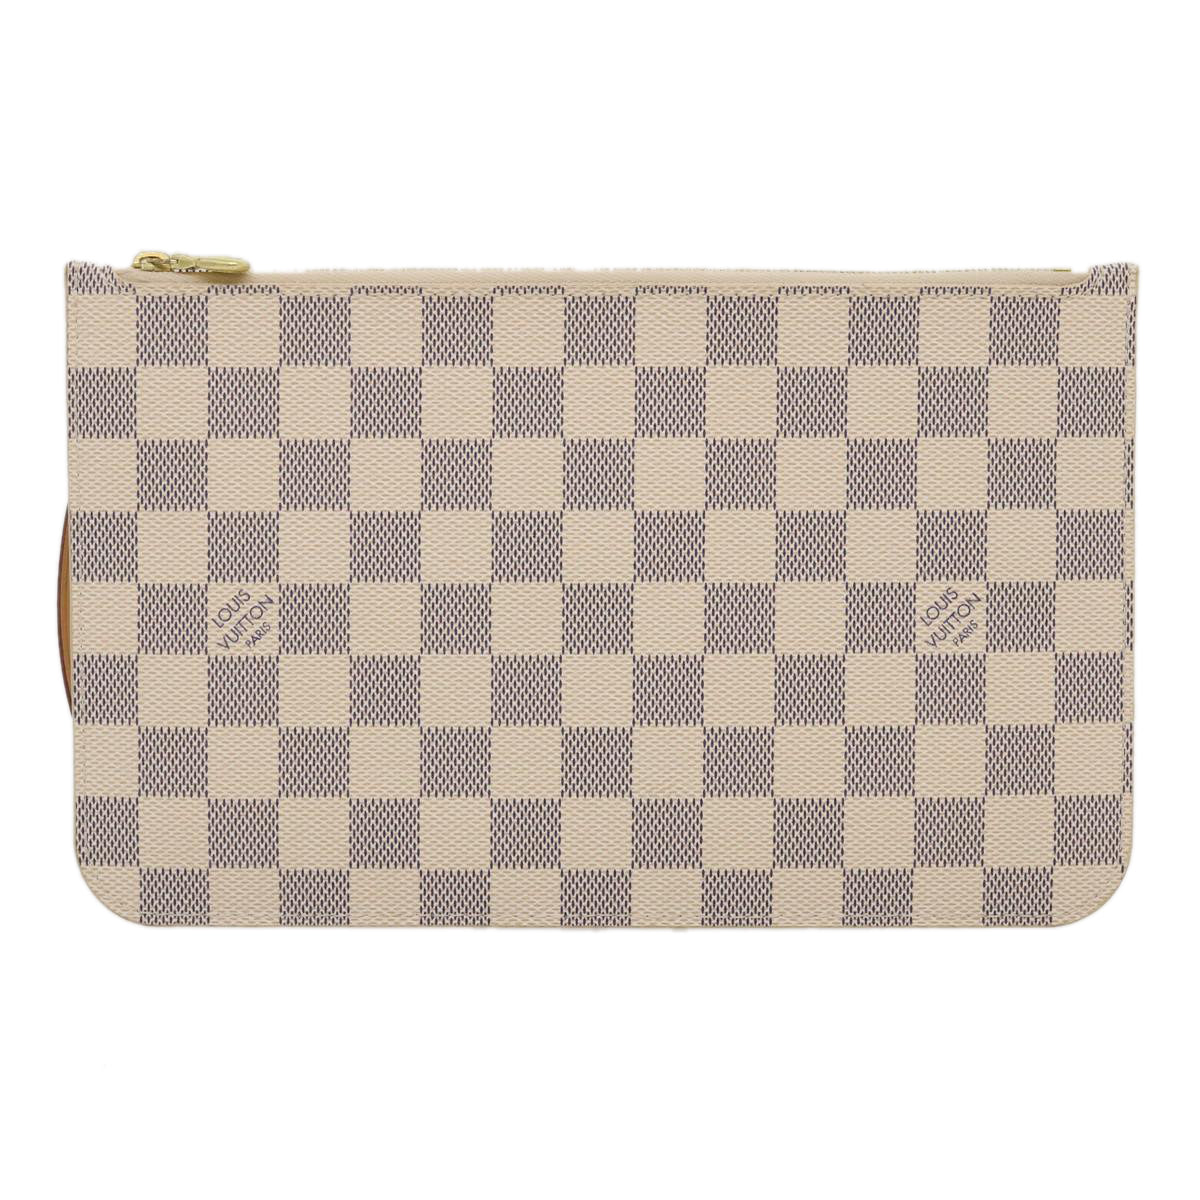 neverfull pouch dimensions